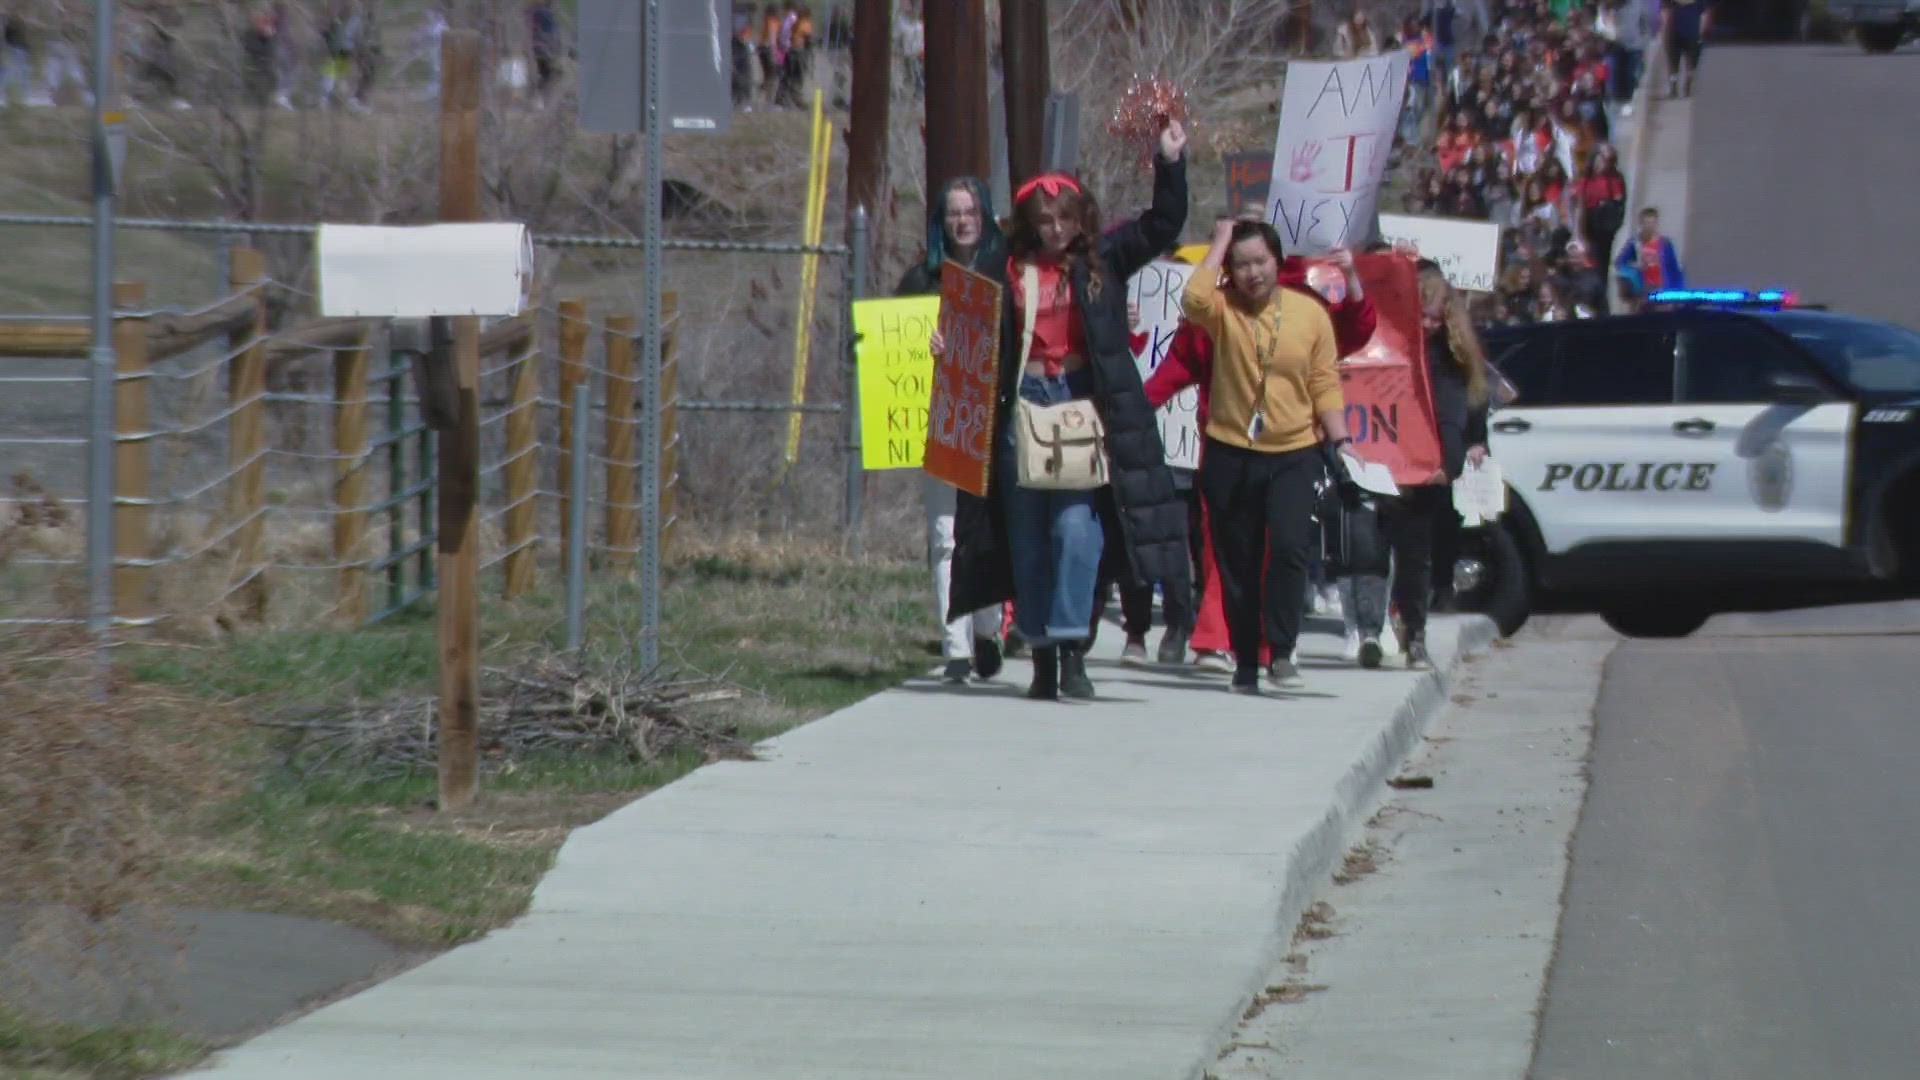 Students across the Denver metro area have joined other schools nationwide in a walkout to bring awareness to the issue of gun violence.